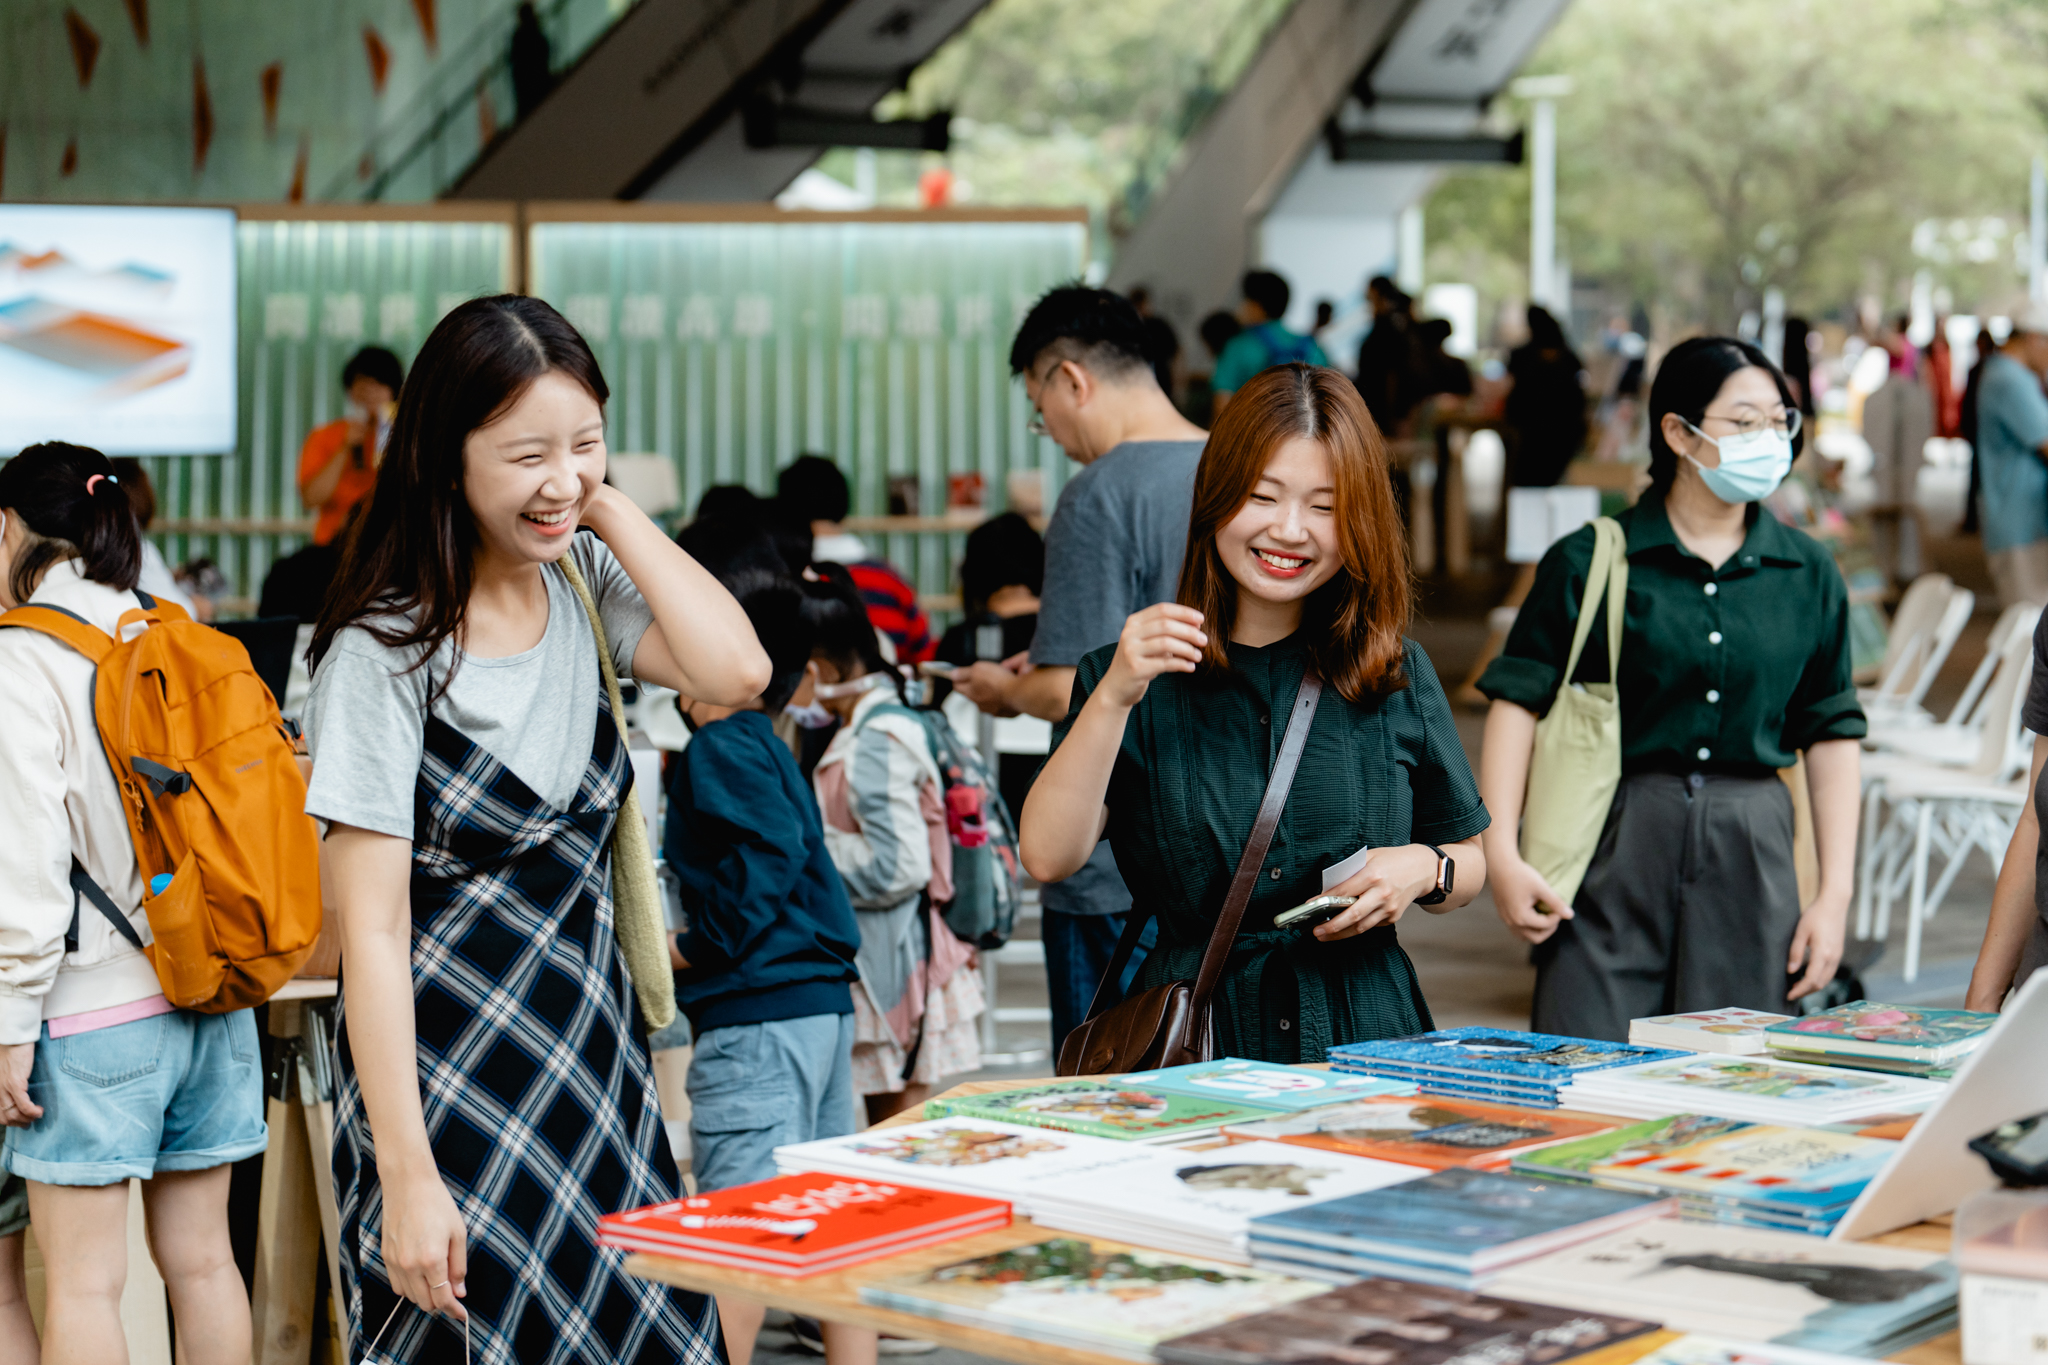 South Korean warm sci-fi author Kim Choyeop visited KPL’s Market on Meadow during the Kaohsiung Reading Festival.